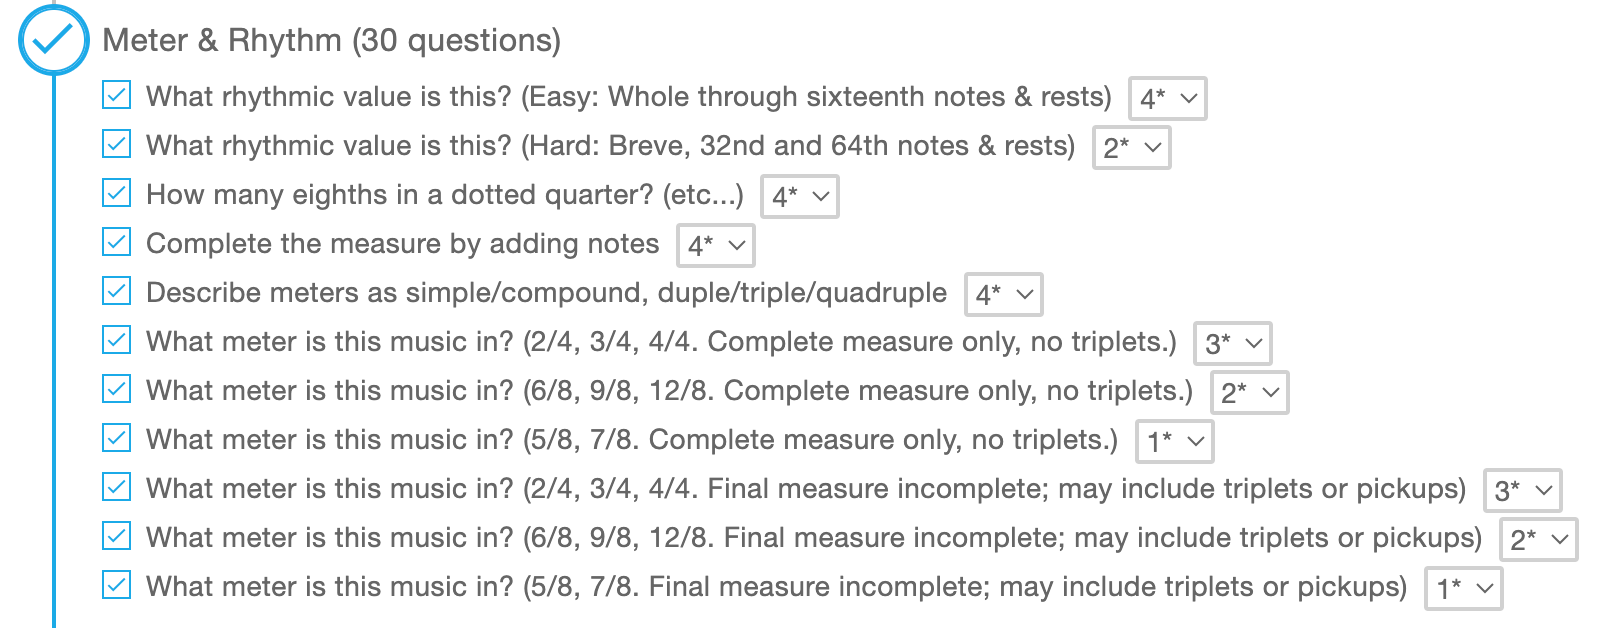 Image showing new question categories for meter & rhythm test section